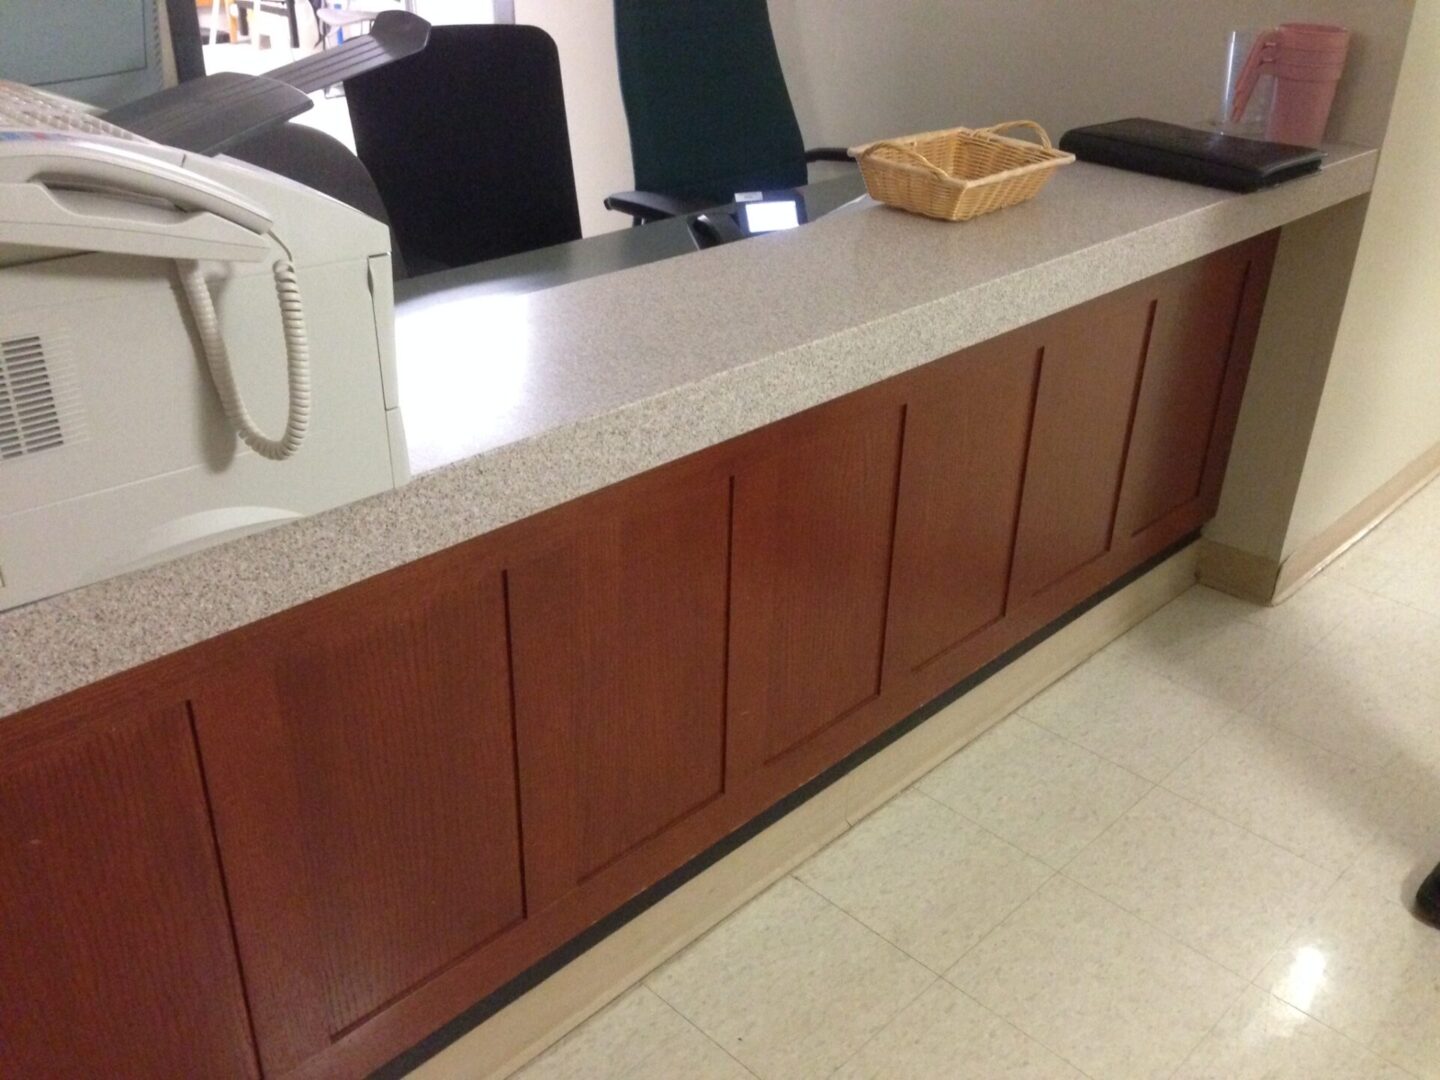 Close view of the counter top information desk